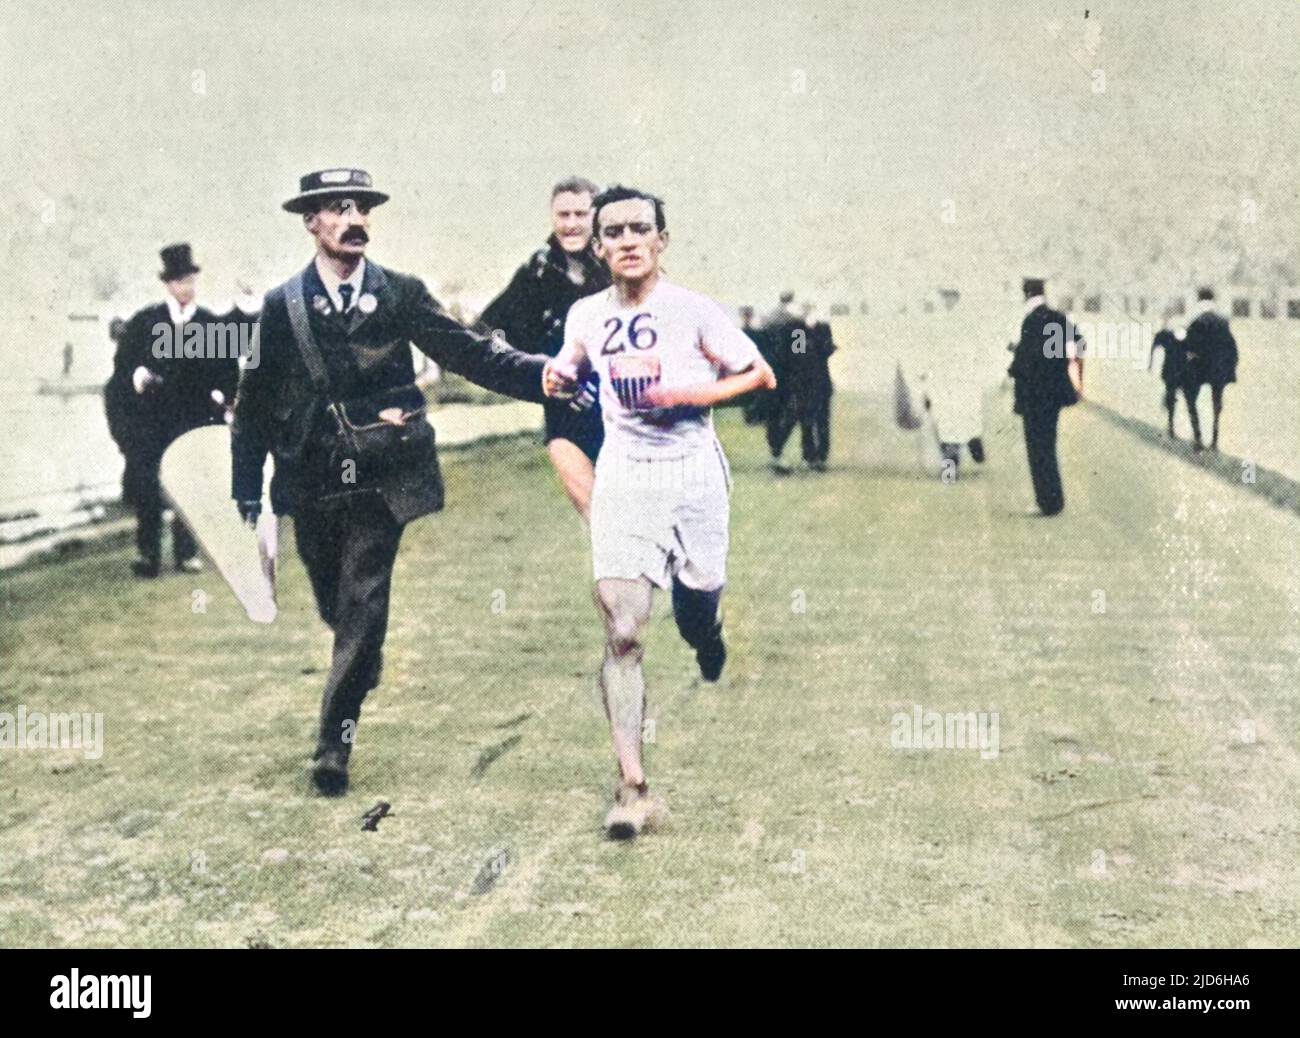 John Hayes, American athlete, in the final leg of the marathon race at the London Olympic Games in 1908. Dorando Pietri of Italy collapsed after entering the stadium ahead of the pack. He was revived by doctors and some of the officials helped him to his feet and then assisted him to the finish line. John Hayes of the United States was the second finisher. Pietri had been declared the winner, but the Americans lodged a protest that was finally upheld. Dorando was nevertheless presented with a special cup by Queen Alexandra for his 'pluck'. Colourised version of: 10217336       Date: 1908 Stock Photo